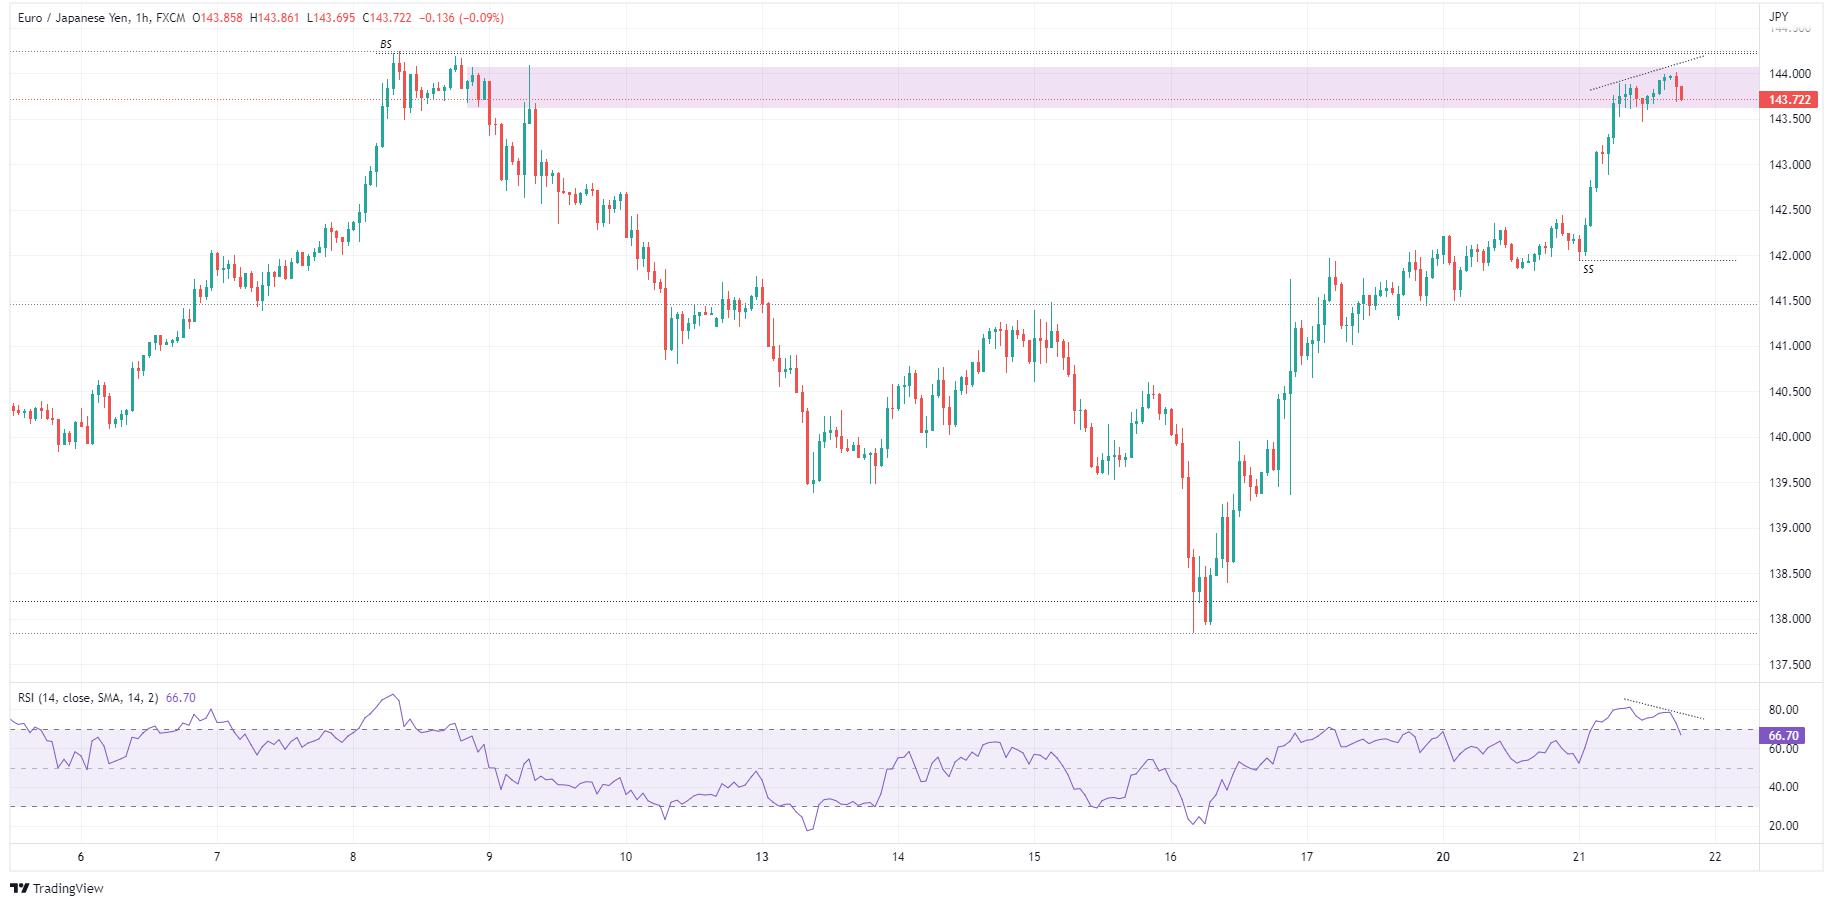 EUR/JPY Price Analysis: Bears to step in on bulls’ failure at 144.00, as a double top looms